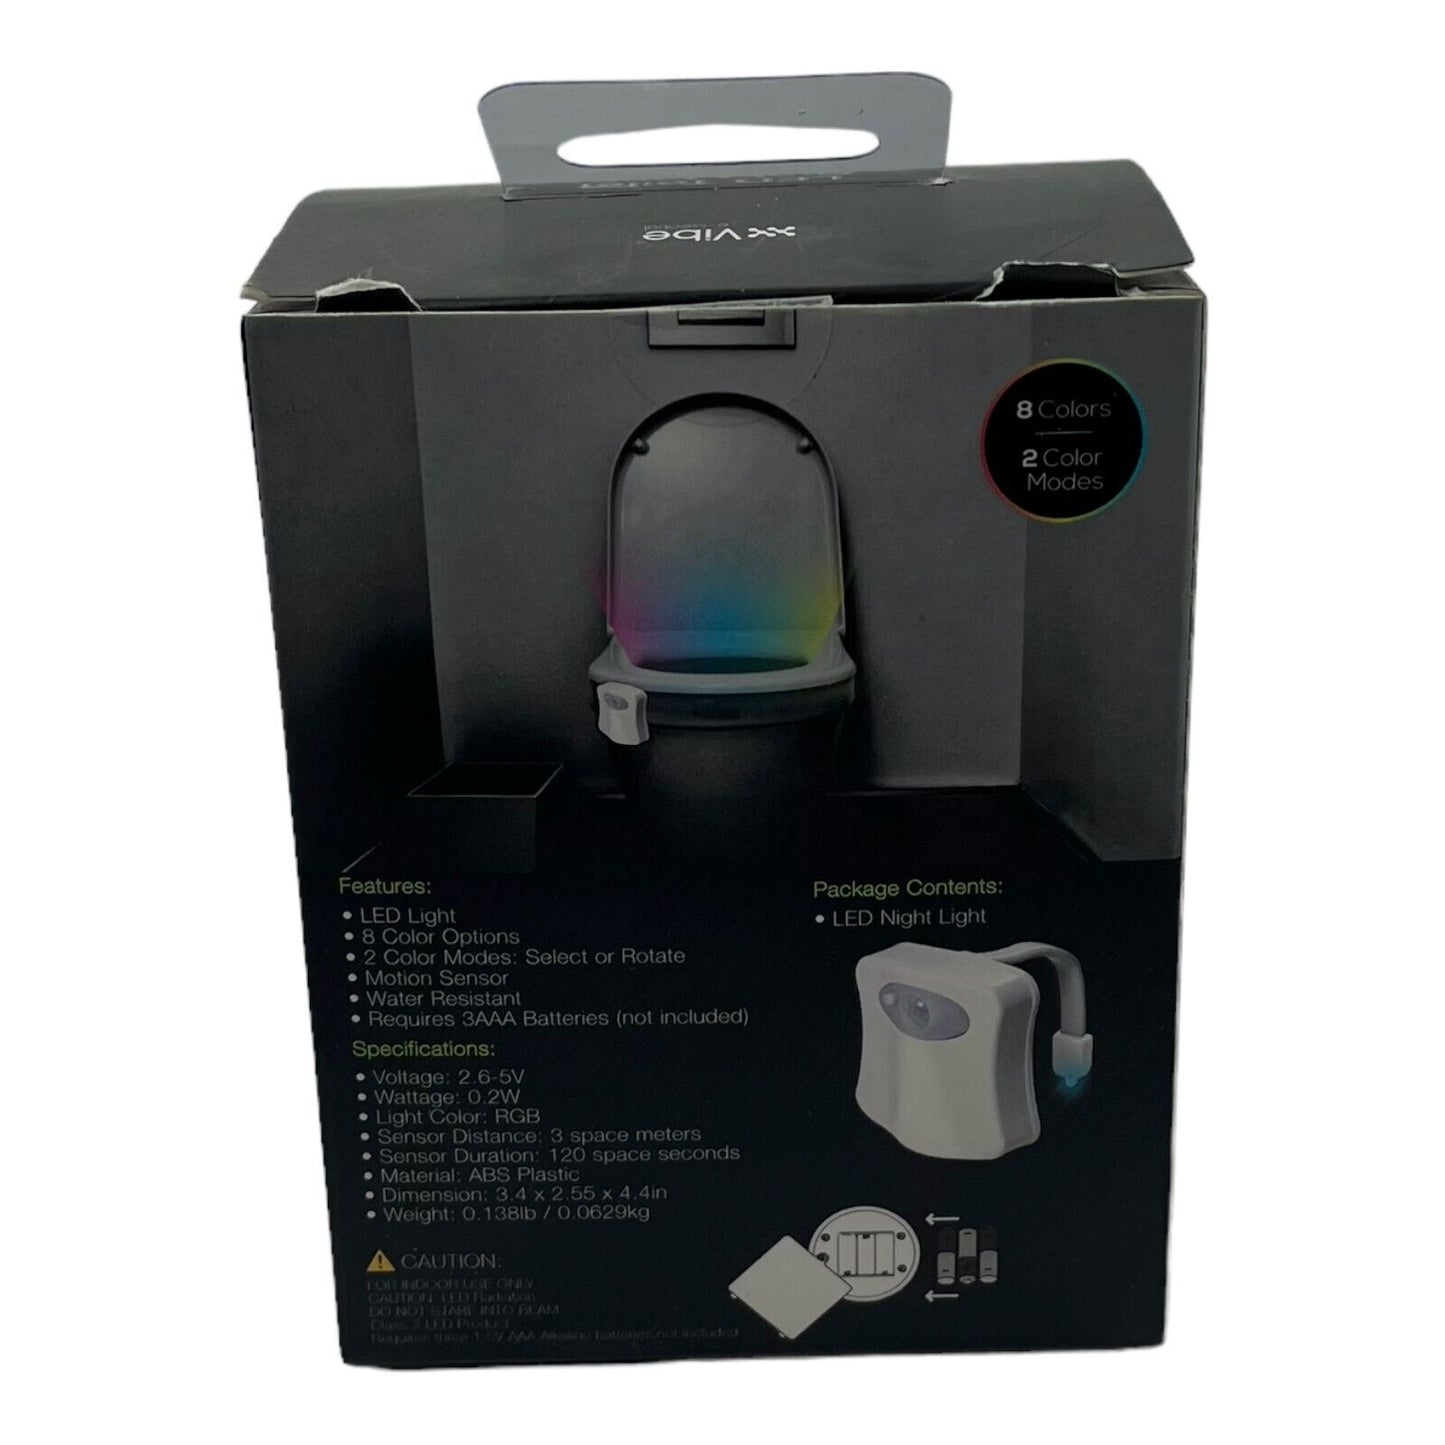 Toilet 8 Color LED Toilet Night Light  with Motion Sensor 2 Color Modes